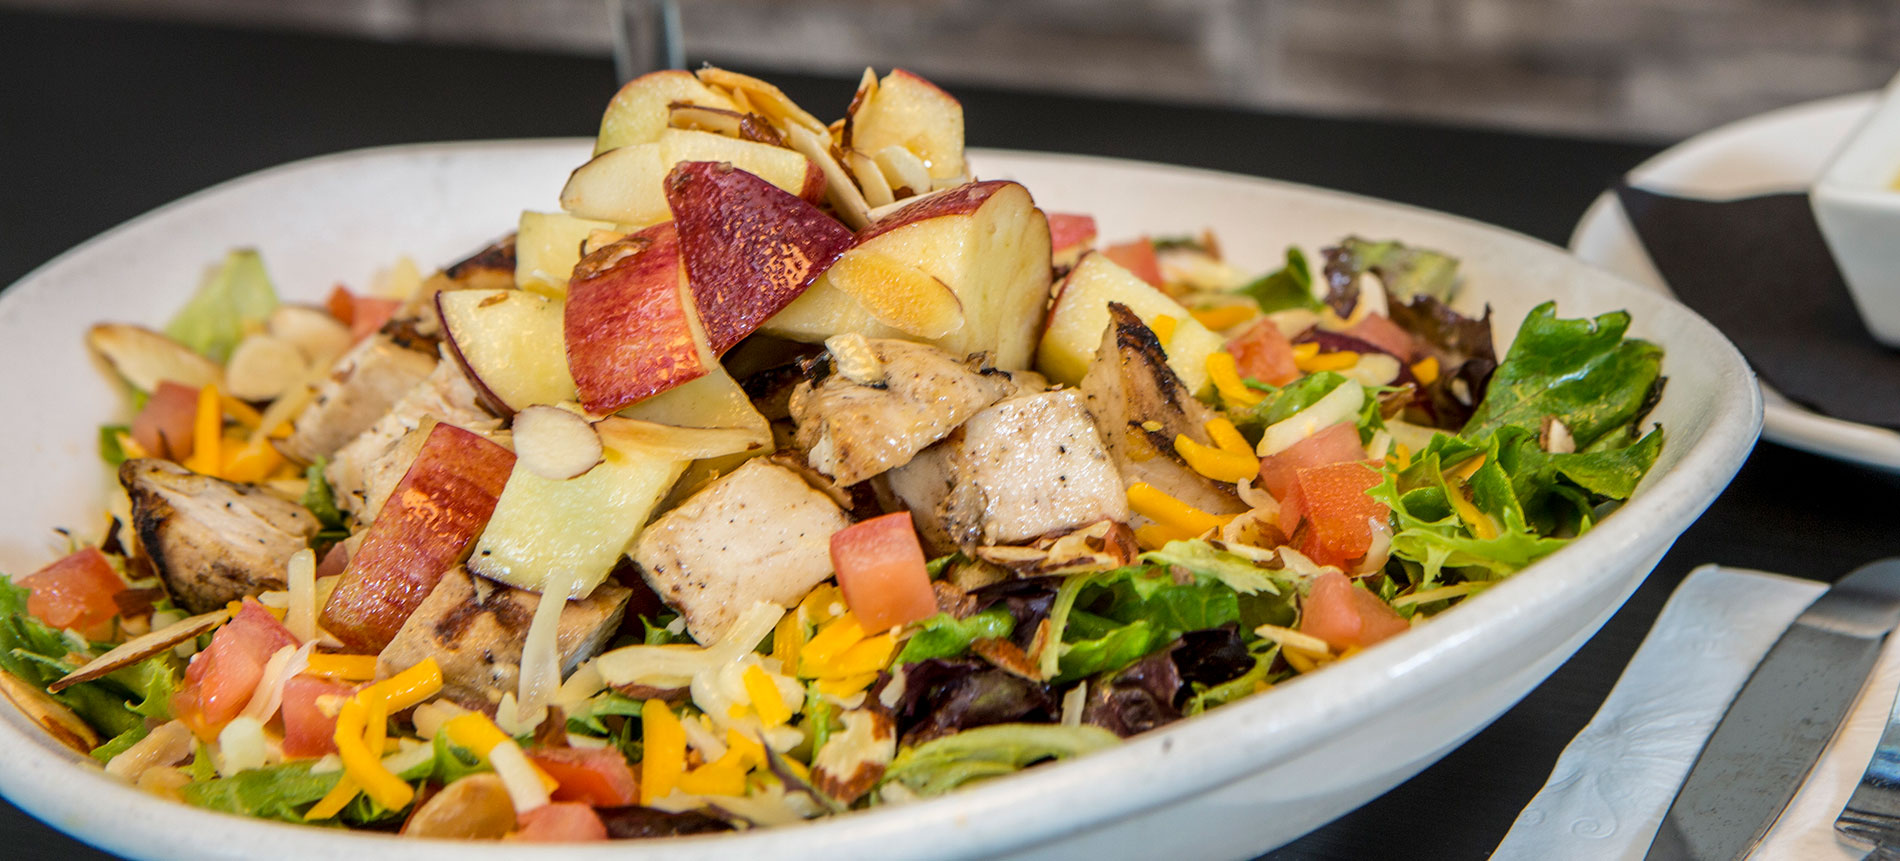 Apple Almond Chicken Salad available only at The Club at Candler Hills restaurant.